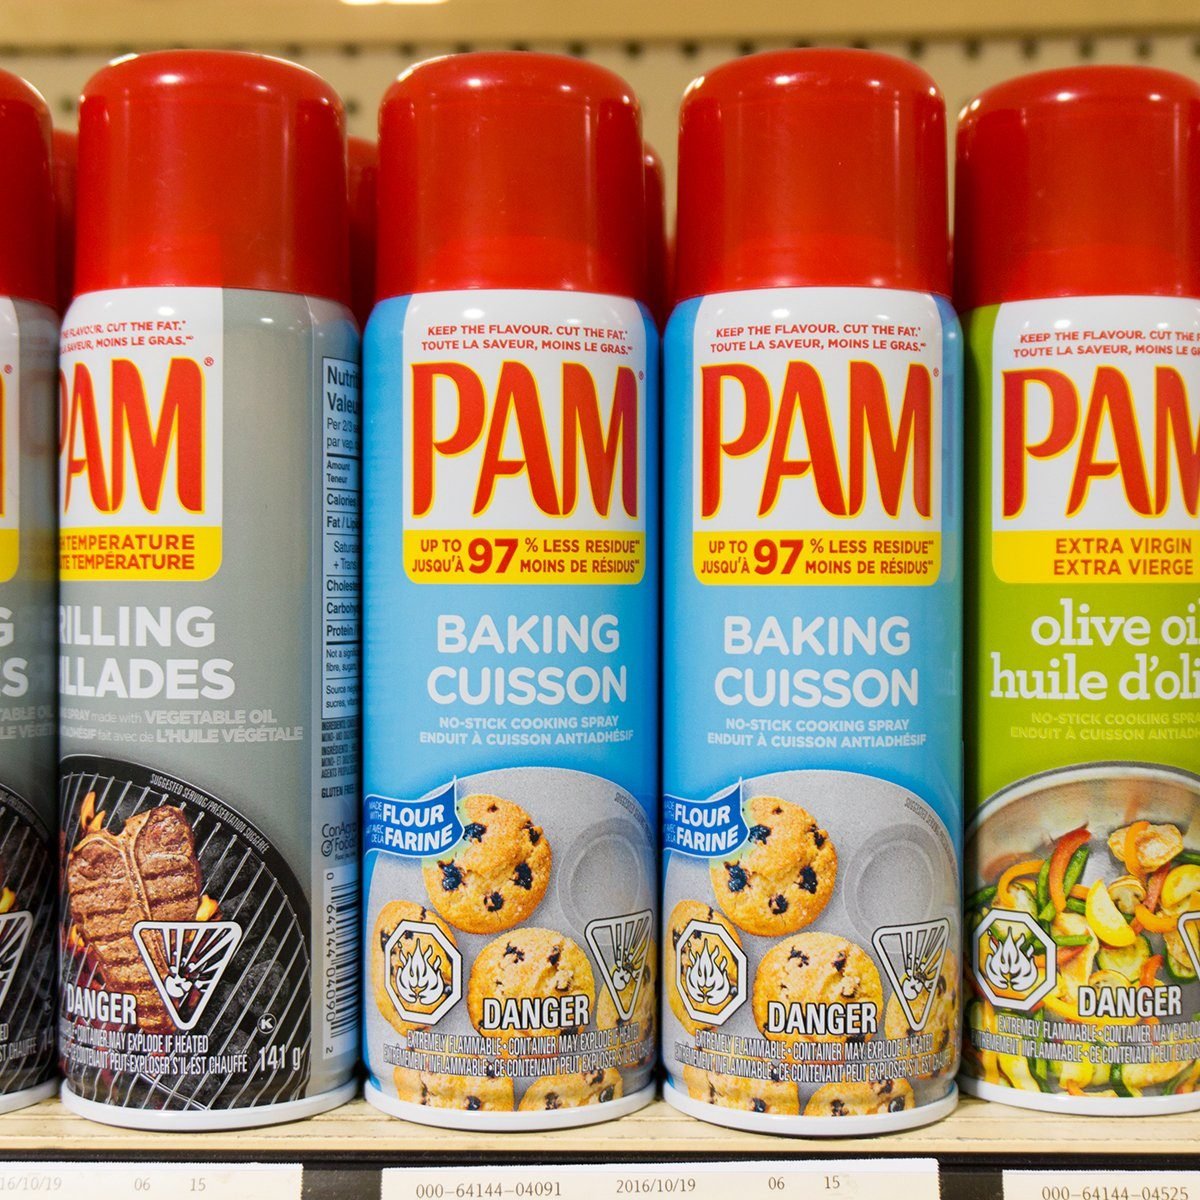 TORONTO, CANADA - 2016/10/23: PAM: cooking sprays in store shelf. PAM is a brand name by Conagra Foods which an American Company. (Photo by Roberto Machado Noa/LightRocket via Getty Images)